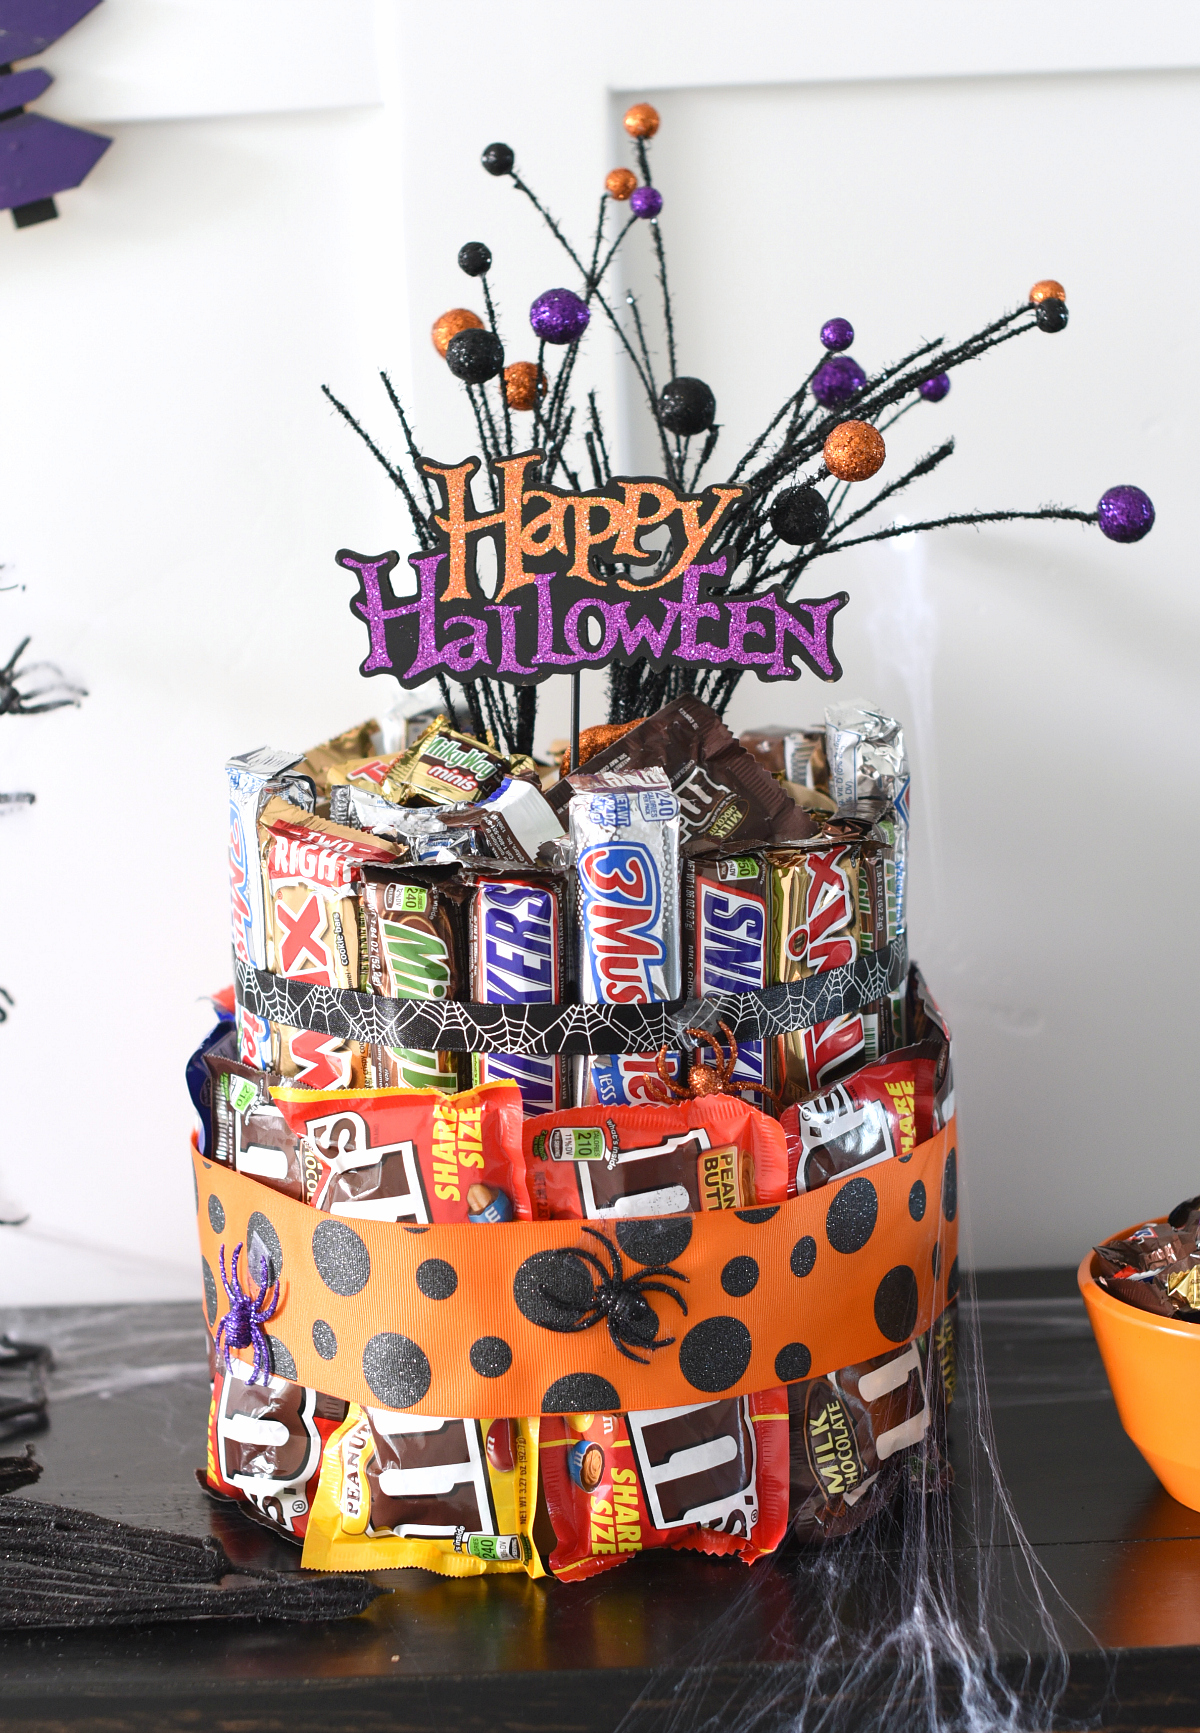 Halloween Candy Cake-Make this cute Halloween candy cake as a centerpiece for your Halloween party or as a gift for a great friend! #Halloween #candy #halloweeparty #partydecor #centerpiece